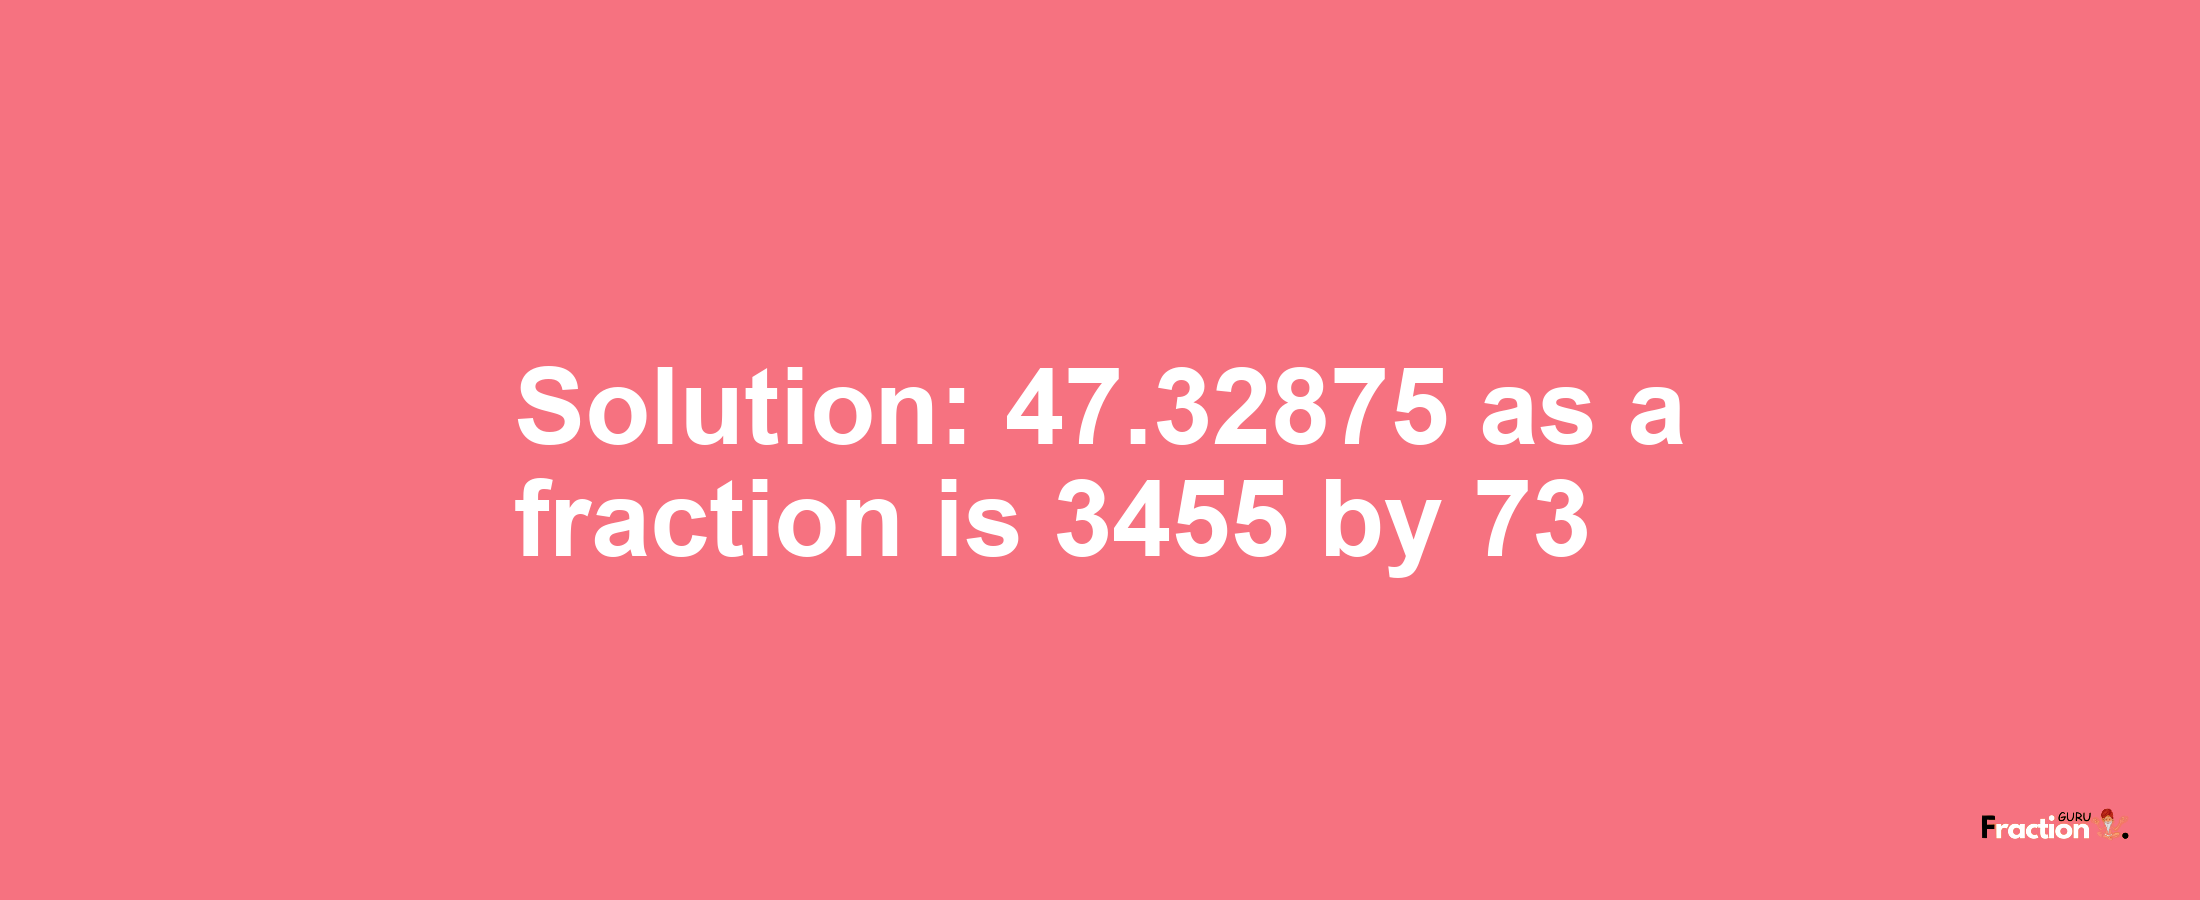 Solution:47.32875 as a fraction is 3455/73